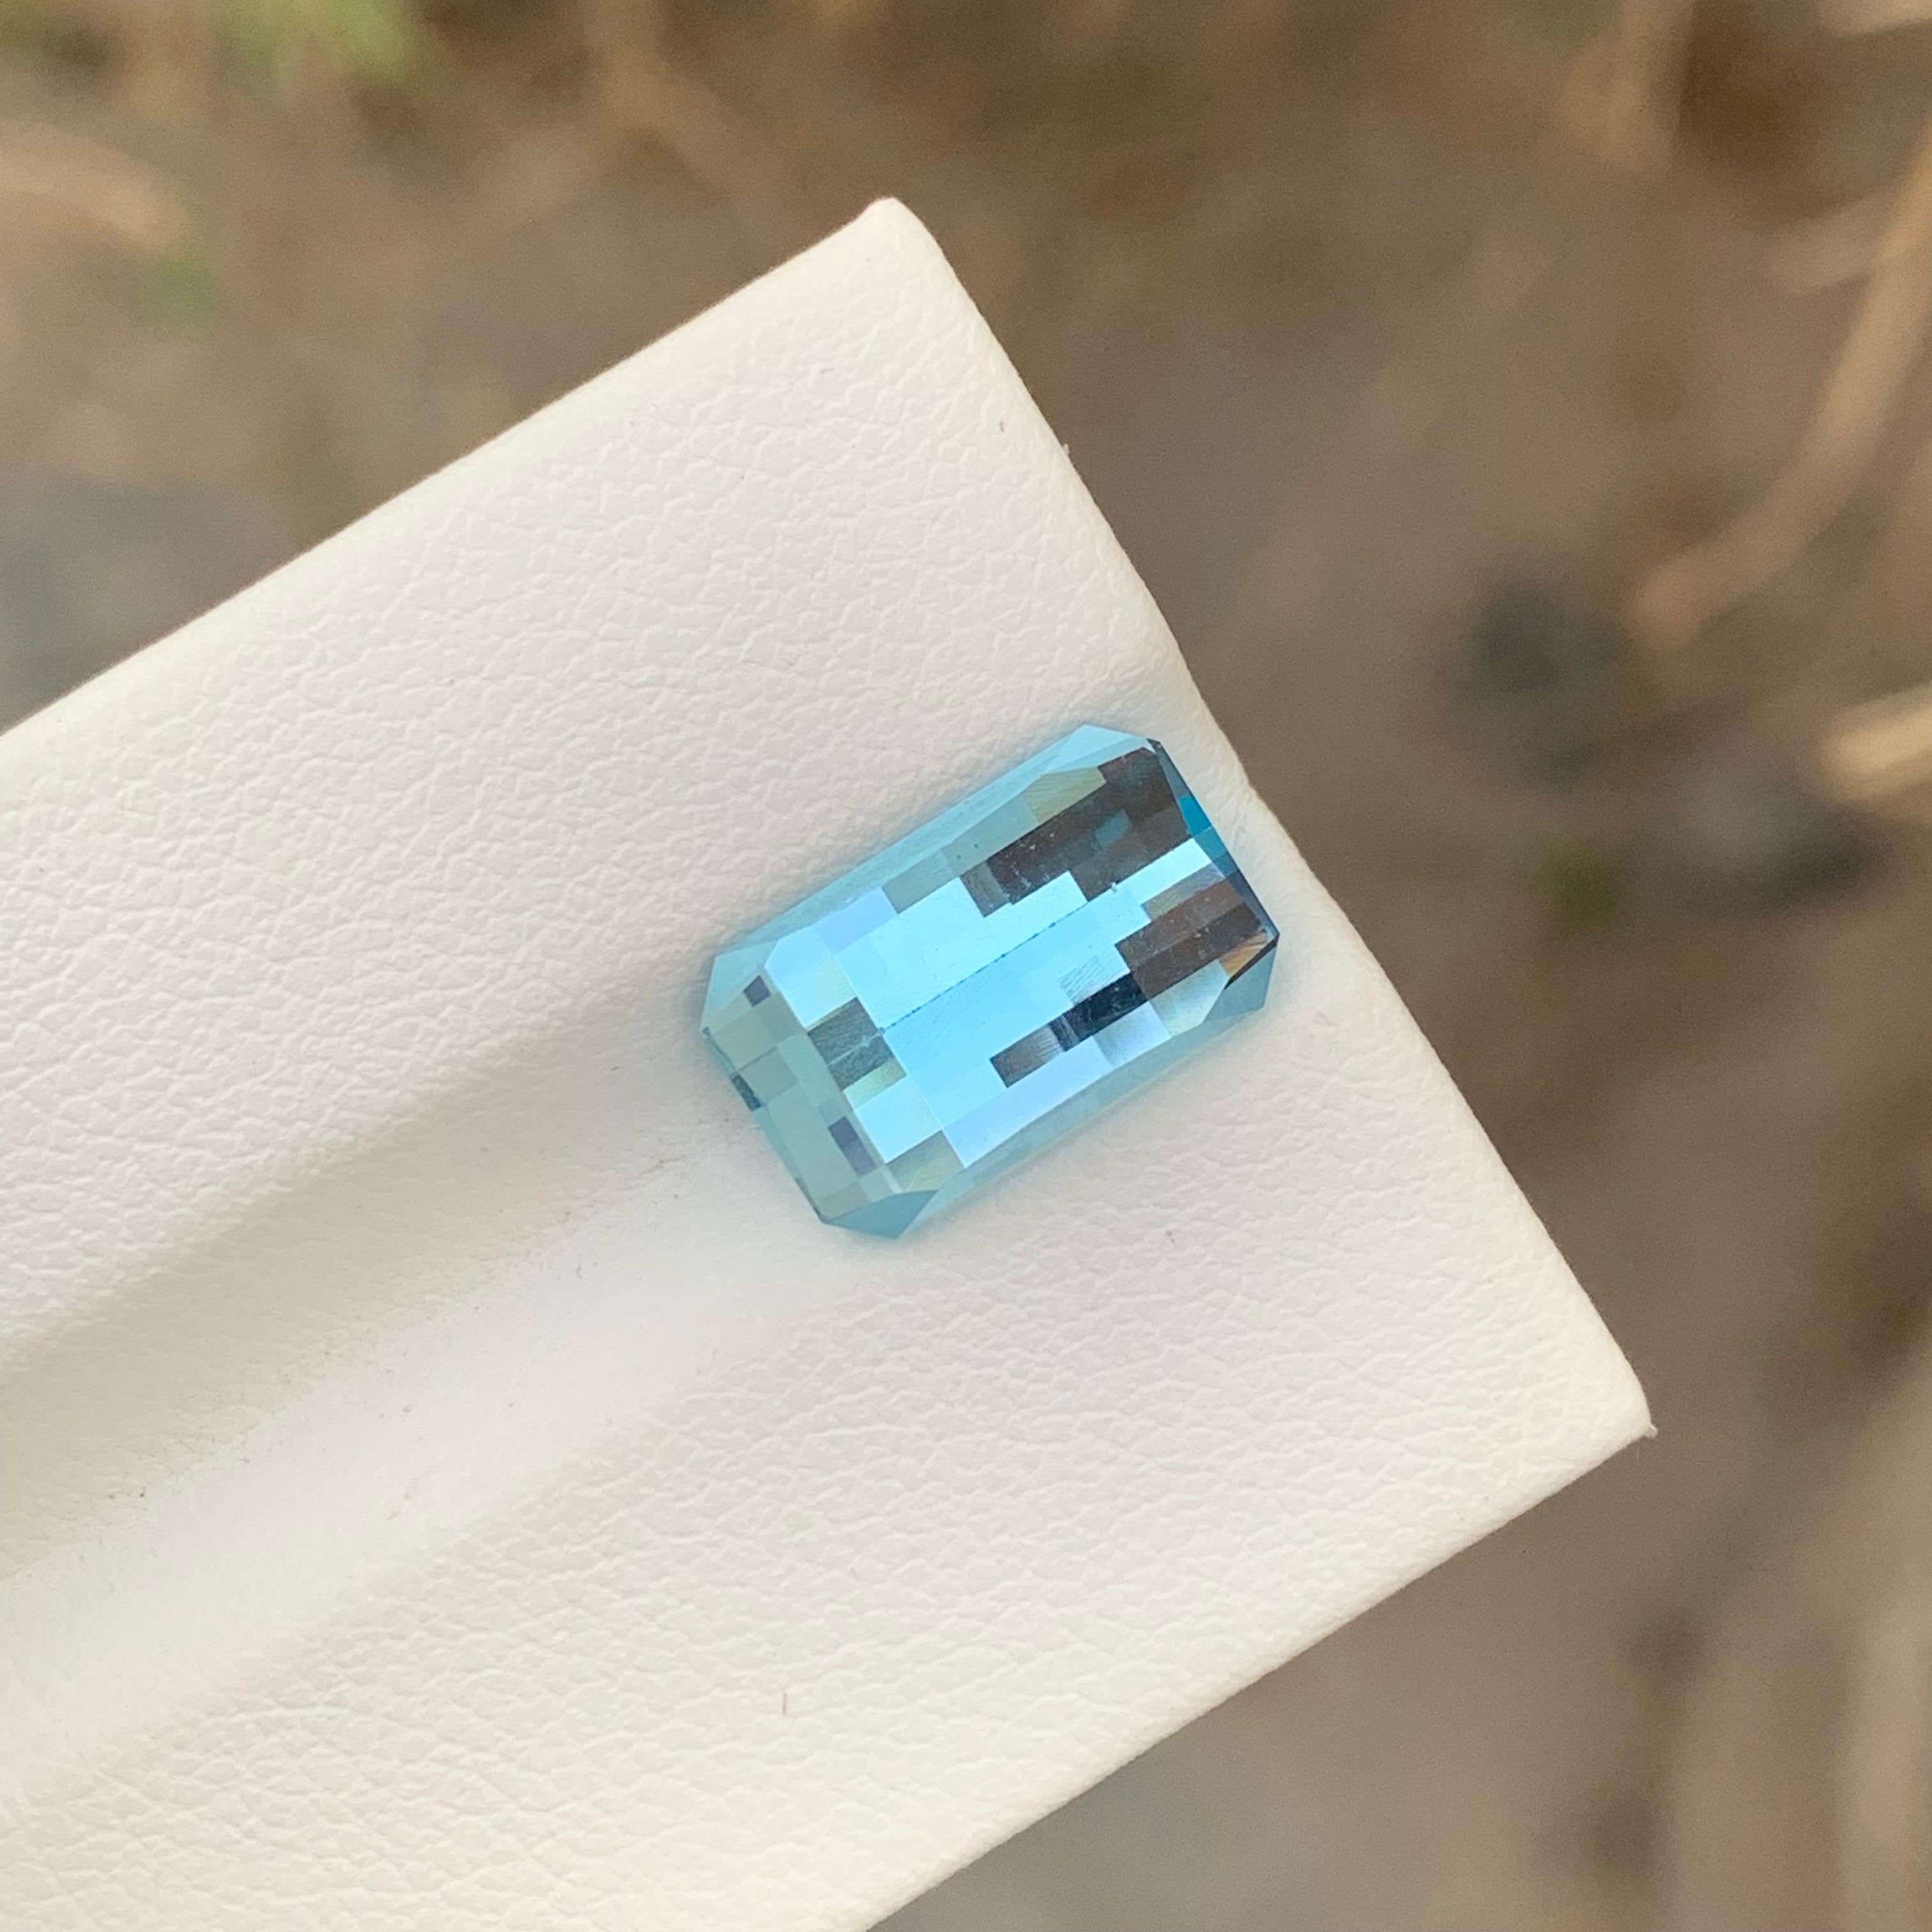 Stunning 6.15 Carats Pixelated Cut Loose Sky Blue Topaz Earth Mine Ring Gem In New Condition For Sale In Peshawar, PK